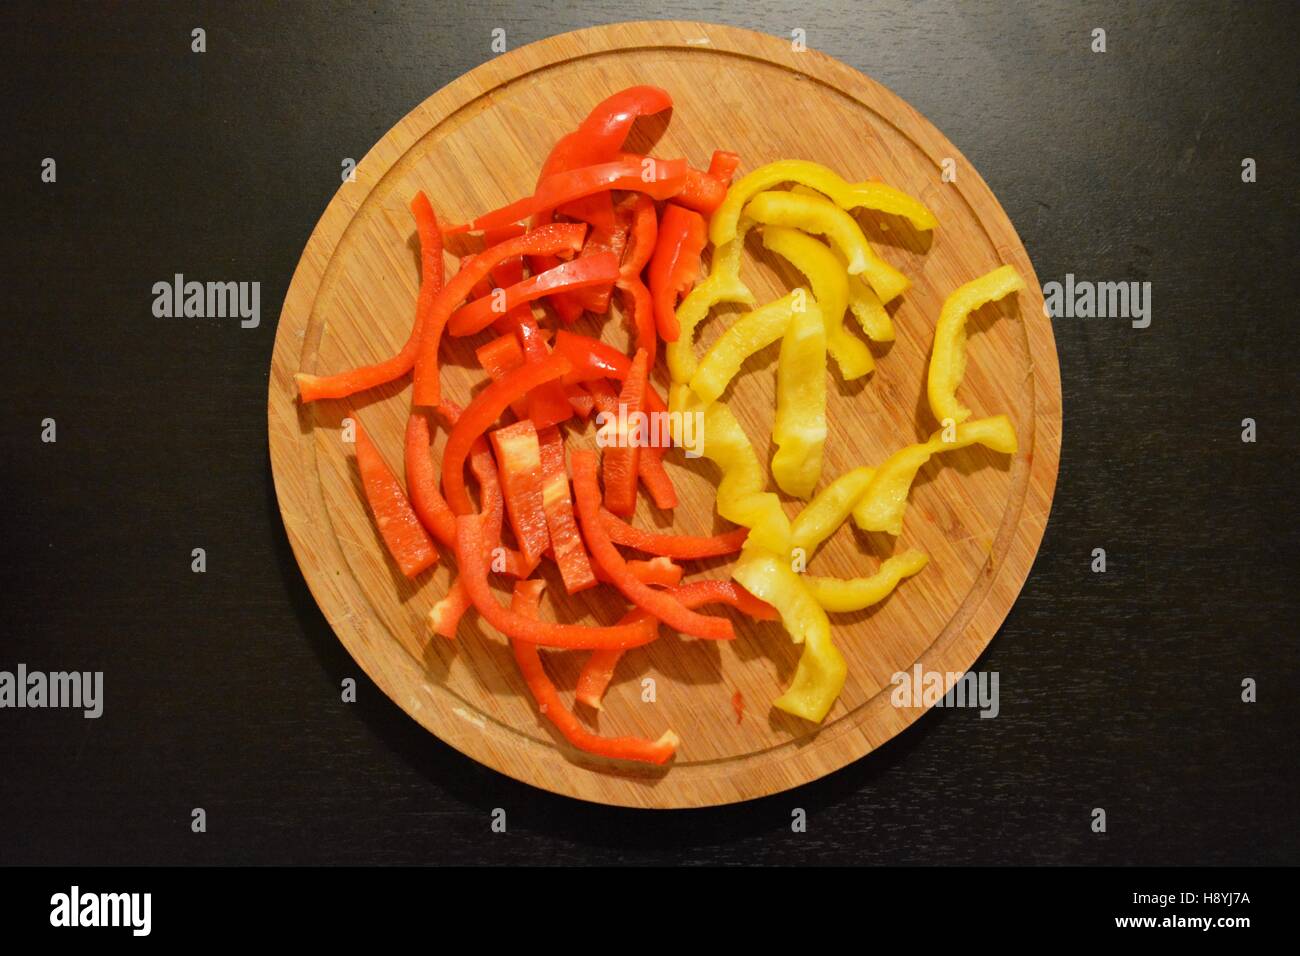 Cut Paprika on a wooden plate from above Stock Photo